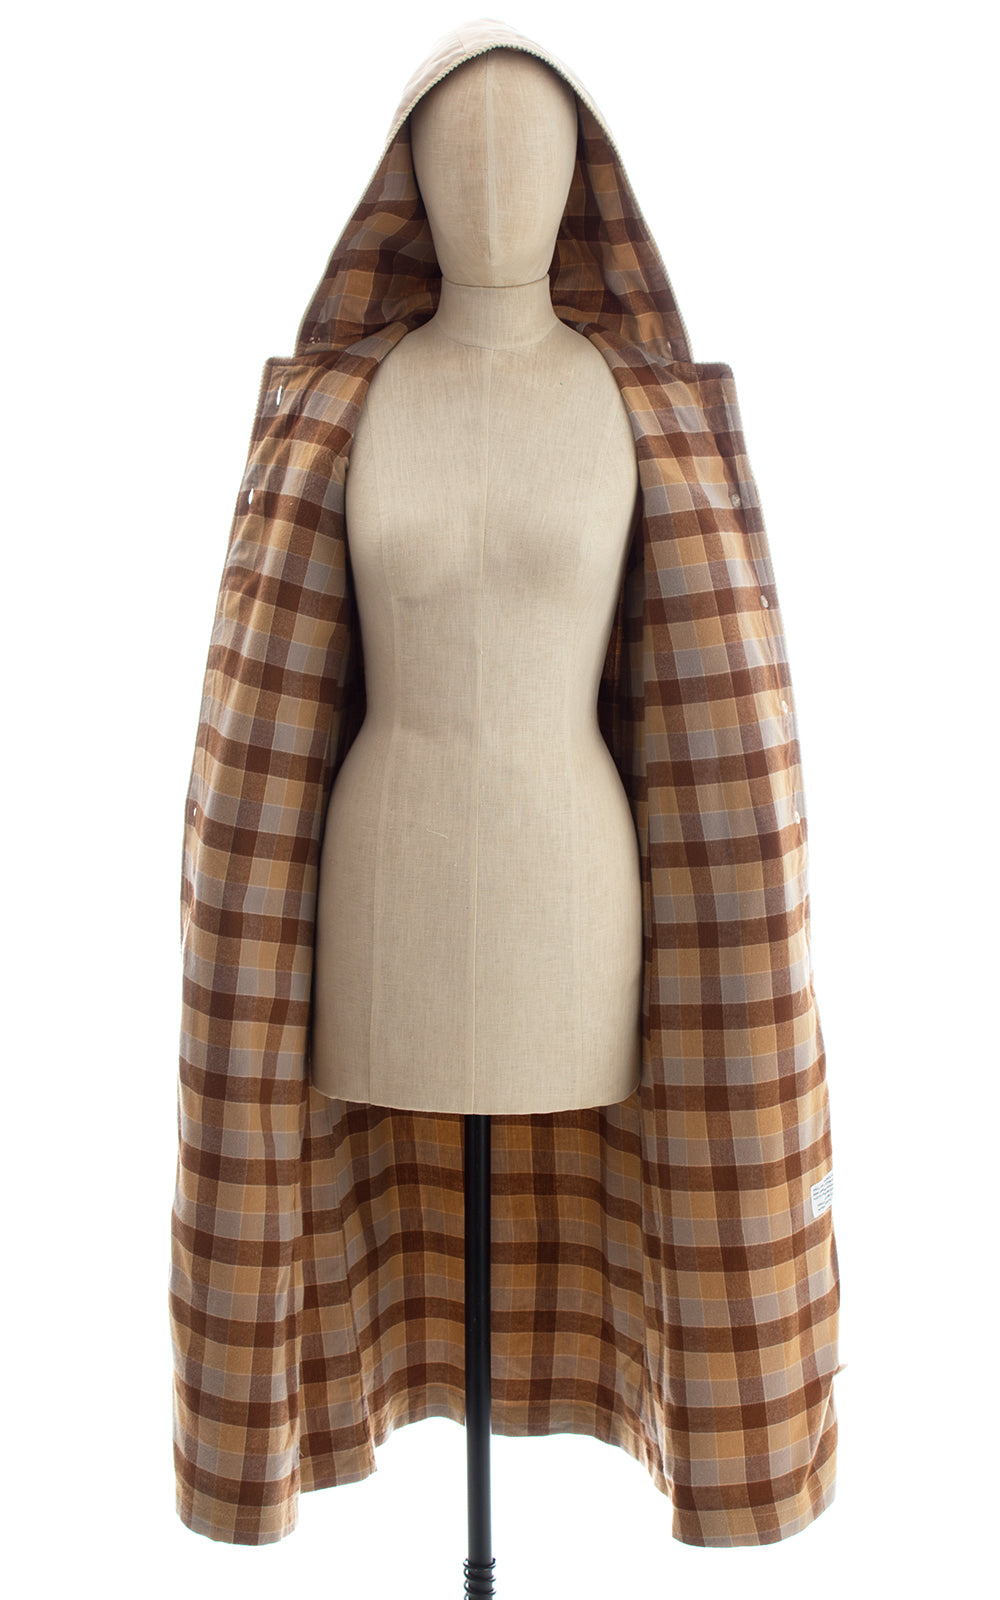 1970s Tan Hooded Trench Coat with Plaid Flannel Lining